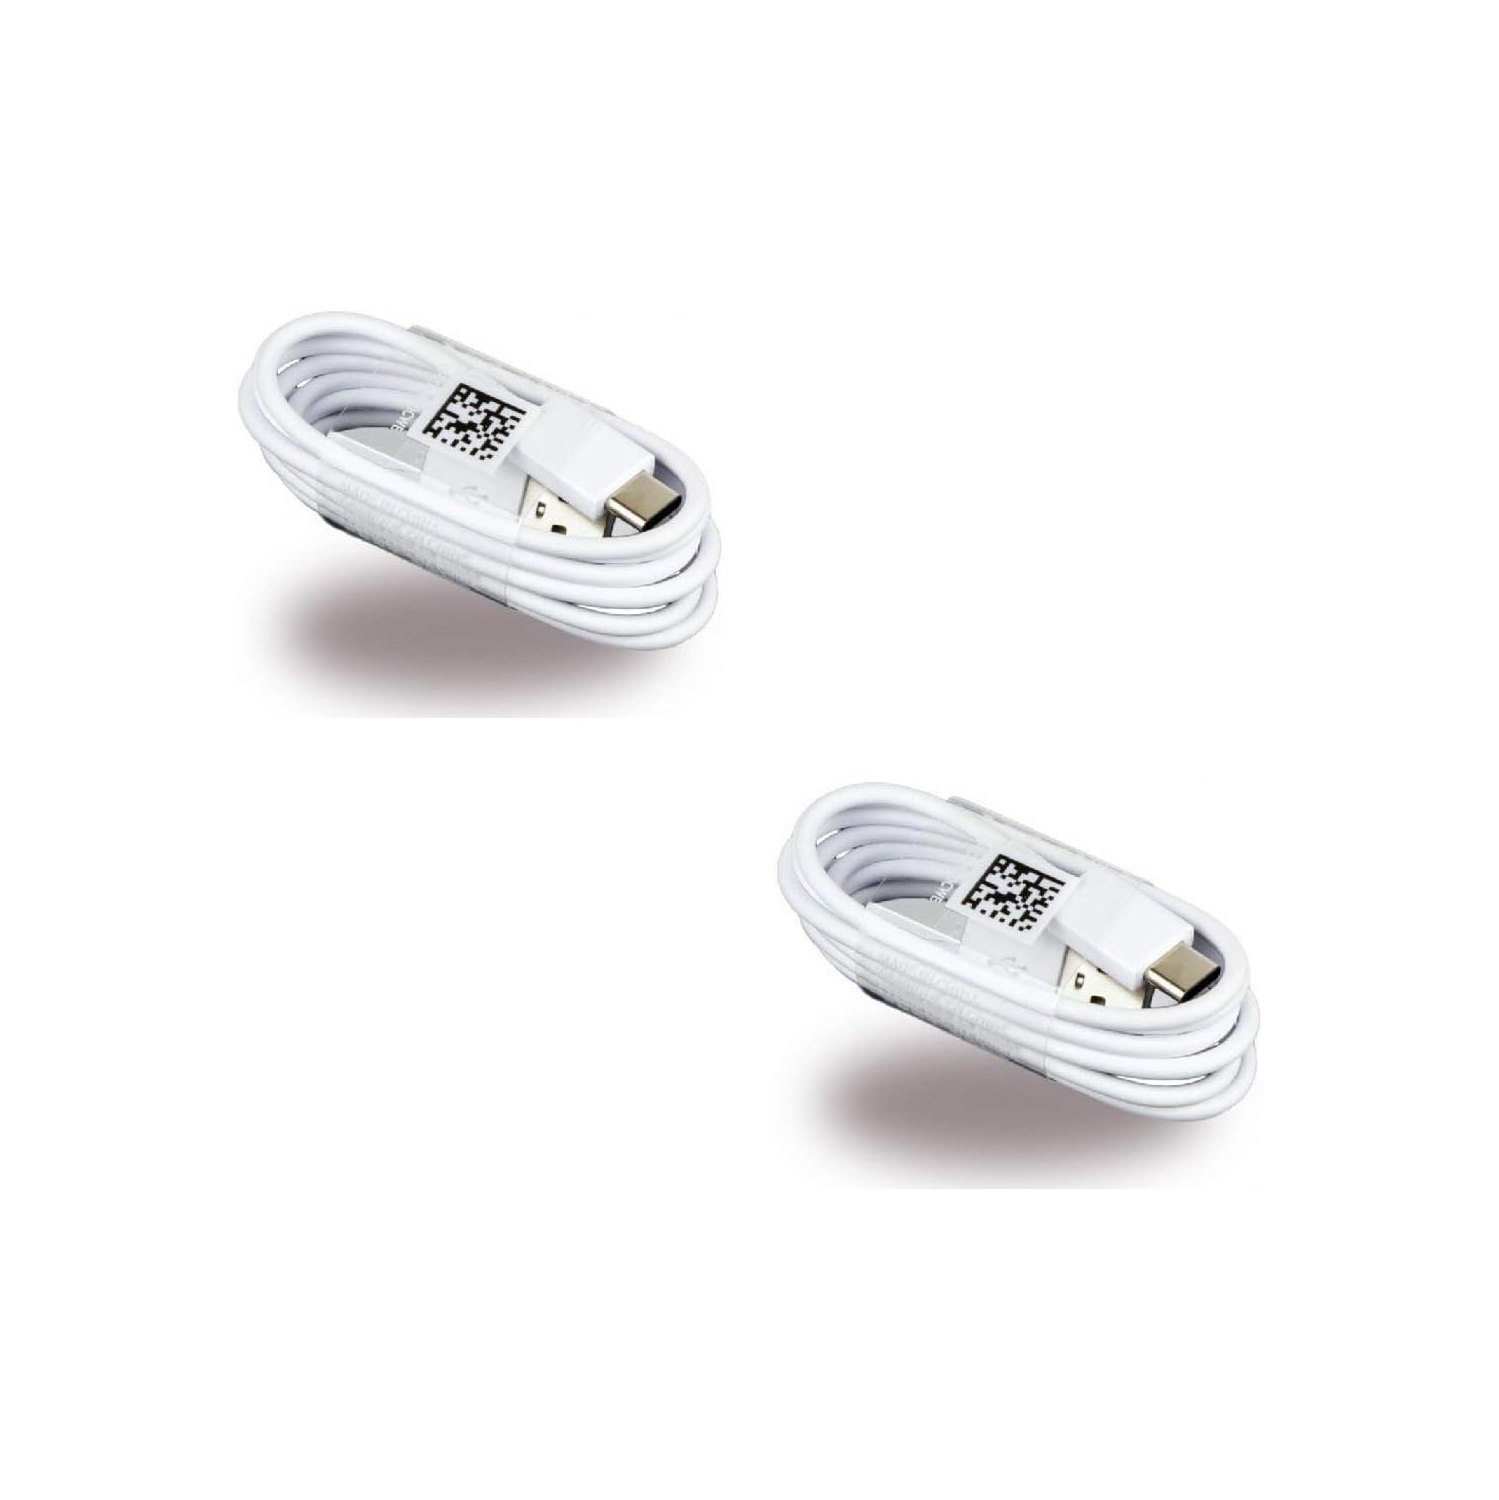 2 PACK USB to Type C Fast Charging Charger Data & Sync Cable for iPhone 15 Series / Samsung Galaxy Series / Motorola / LG / Google Phones, White(FREE SHIPPING)